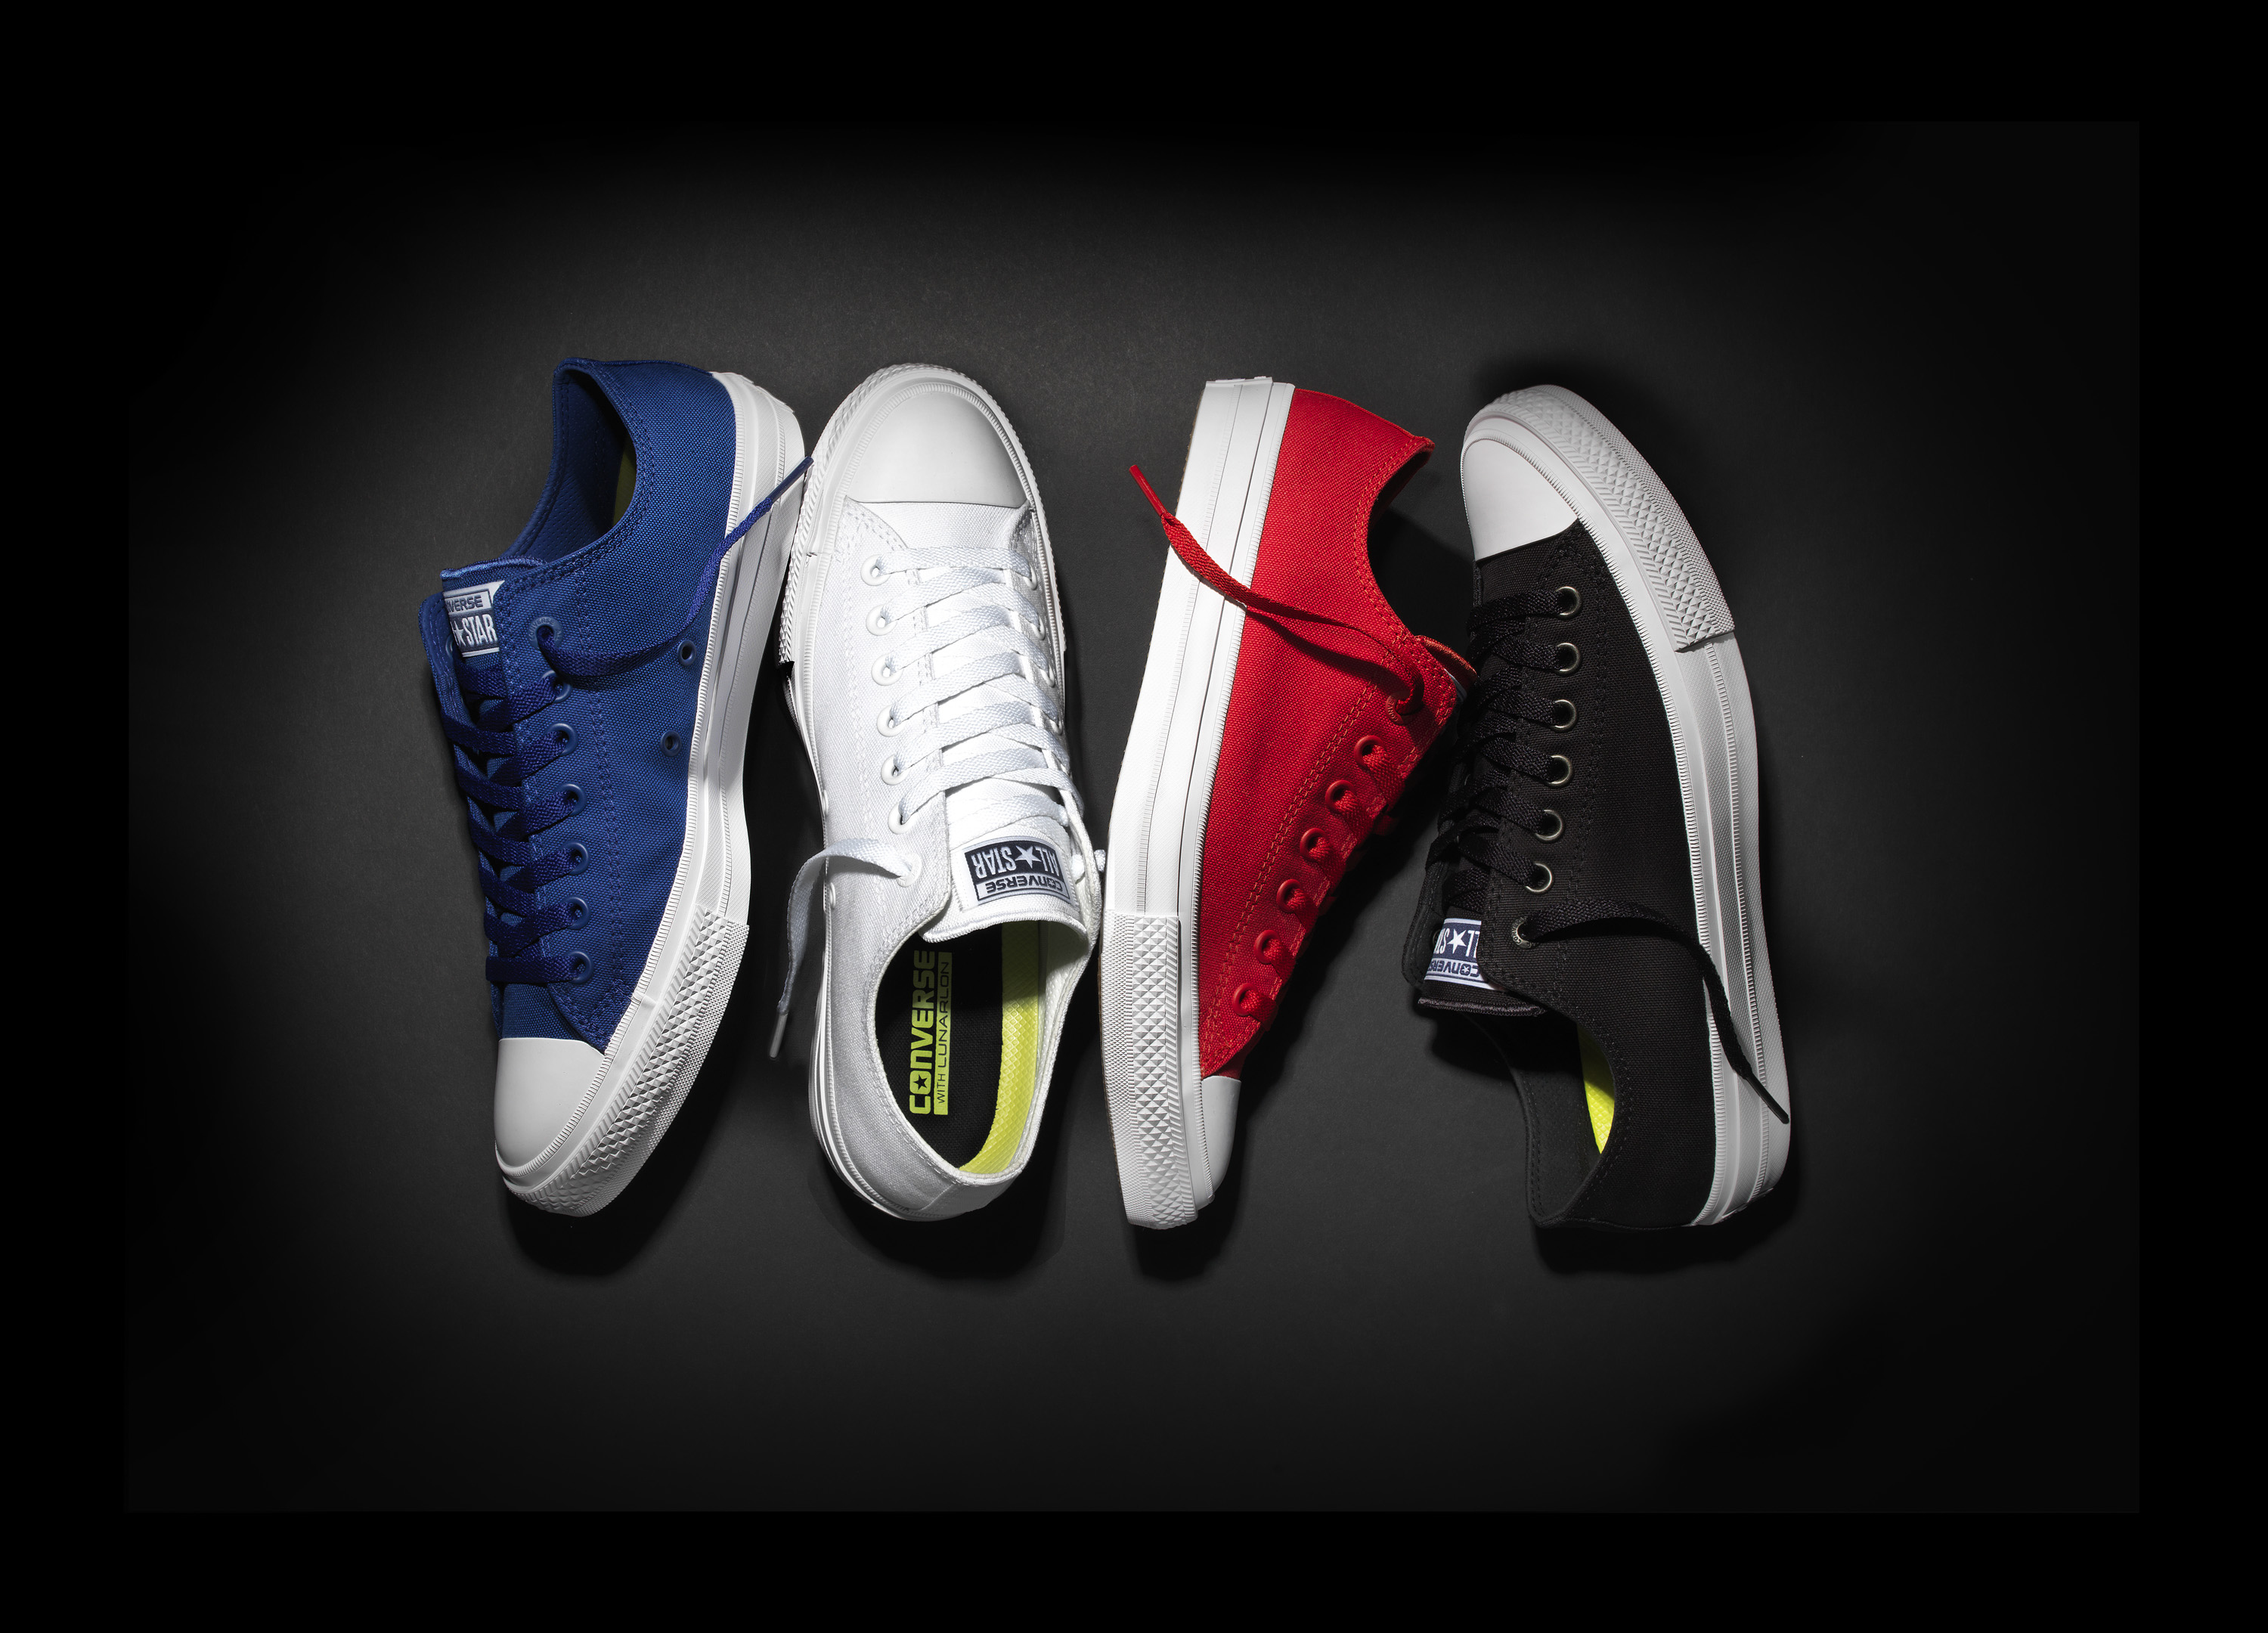 The new Fall 2015 Chuck Taylor All Star II sneaker in blue, white, red and black.